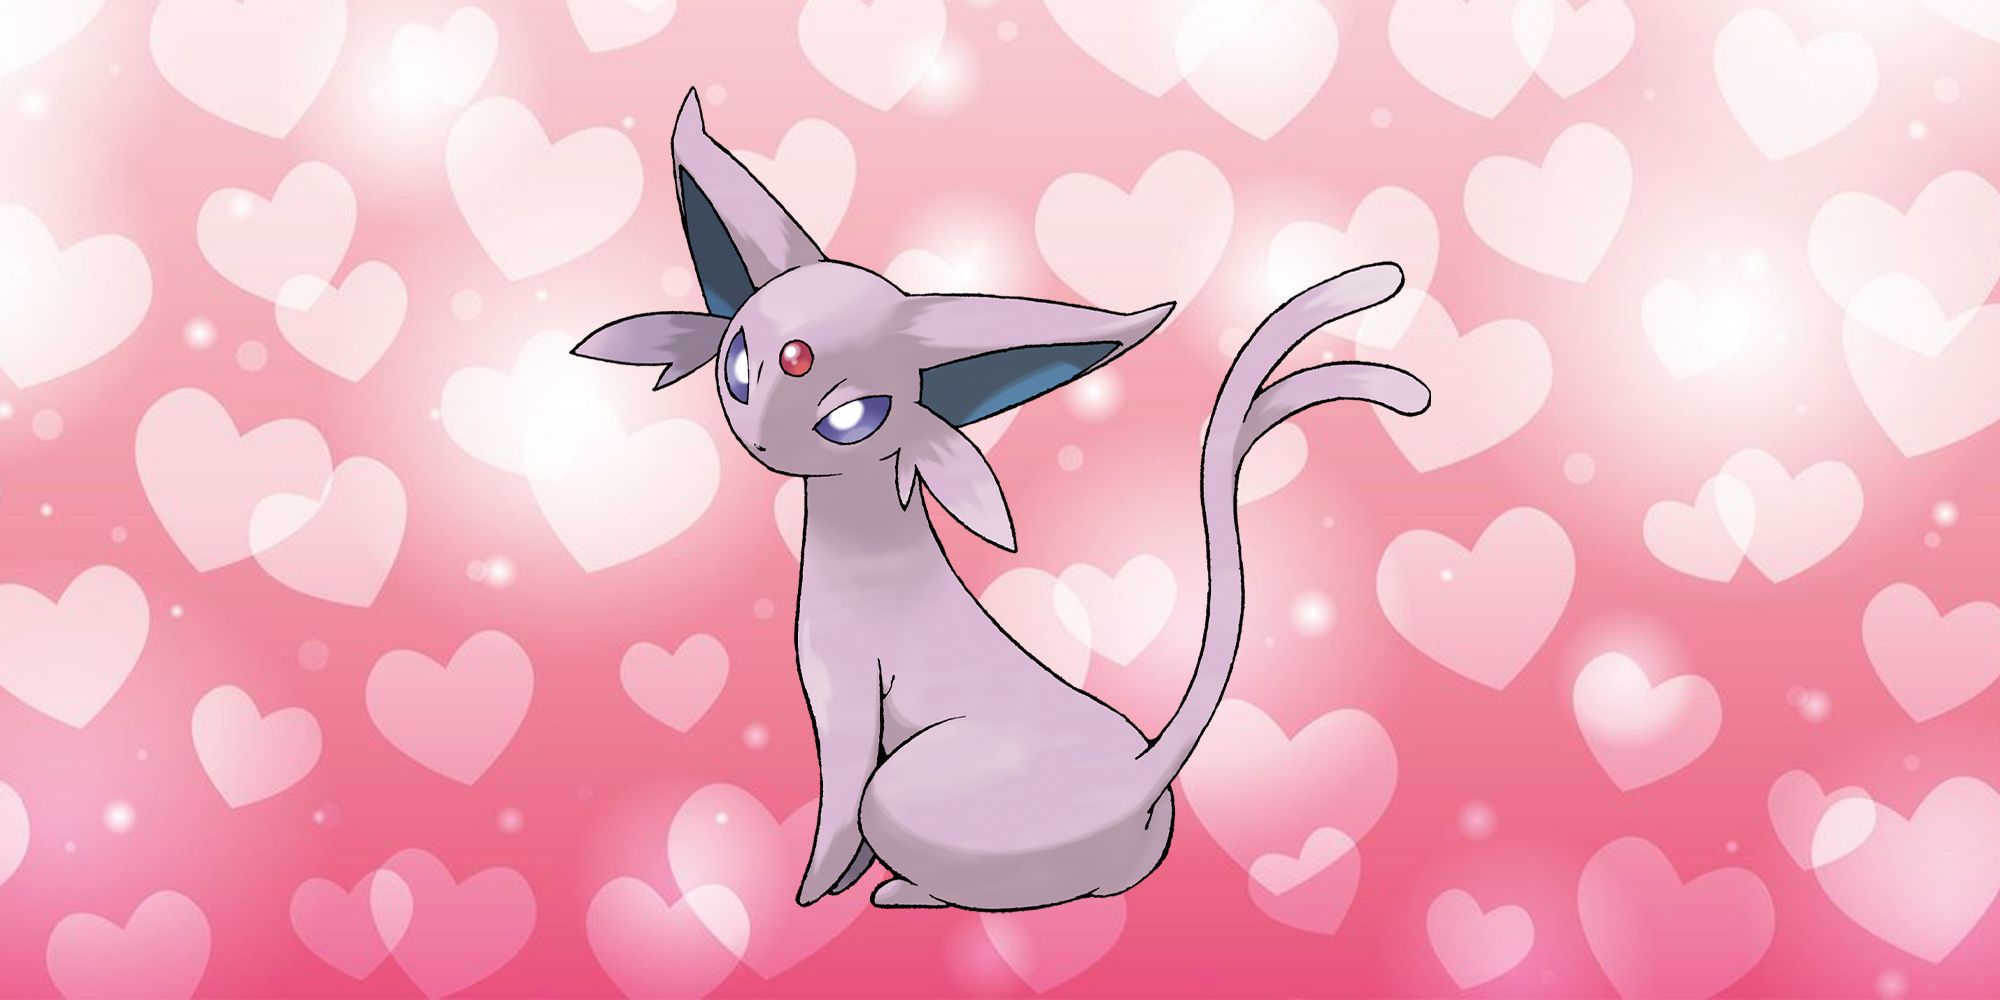 An Espeon Pokemon on a background of hearts.